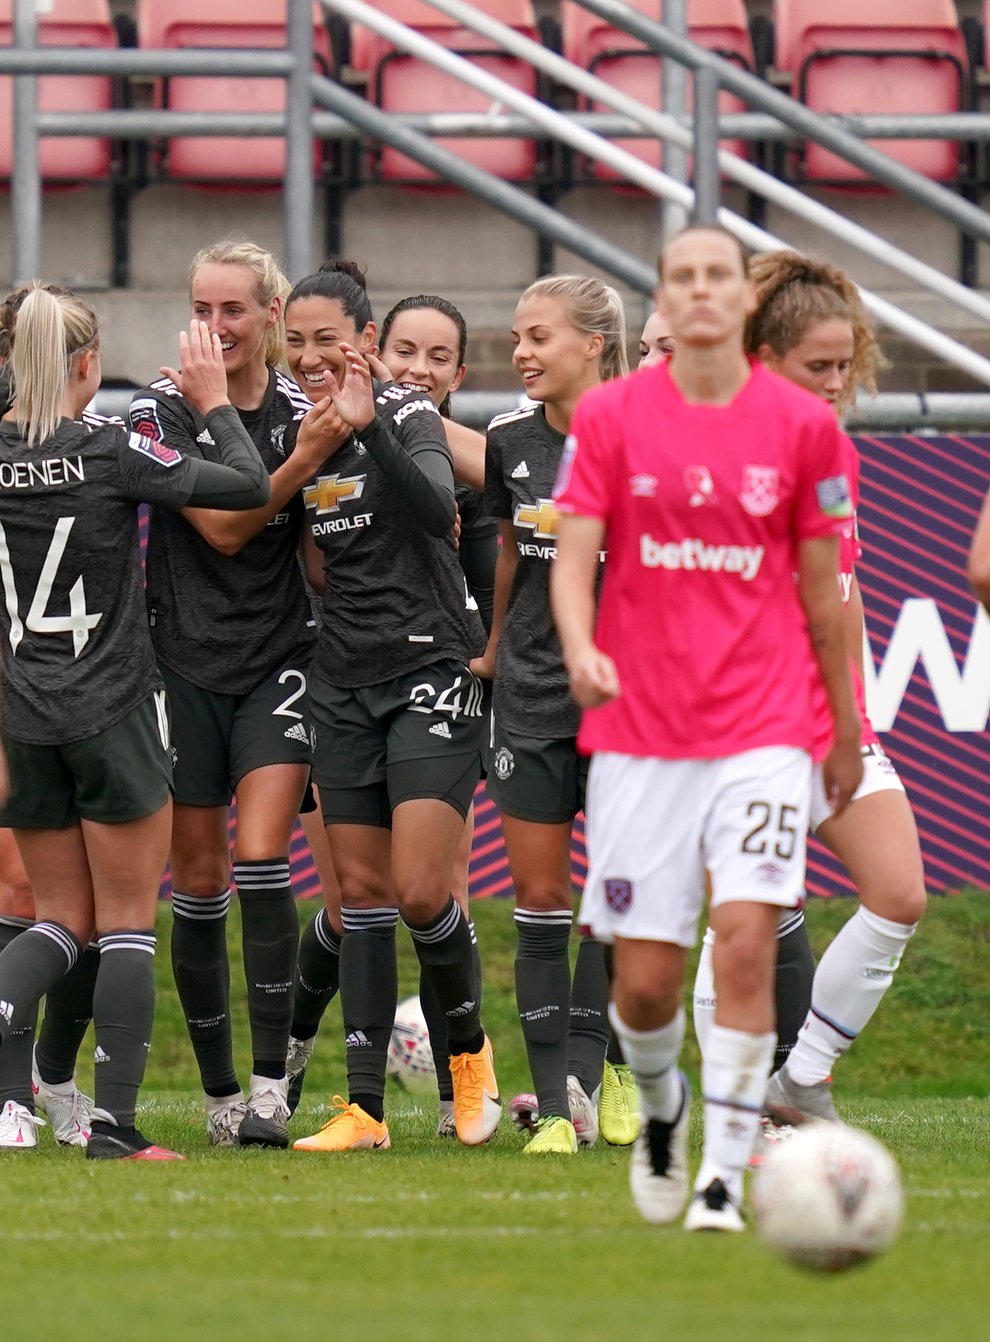 West Ham are still waiting for their first Women’s Super League victory of the season